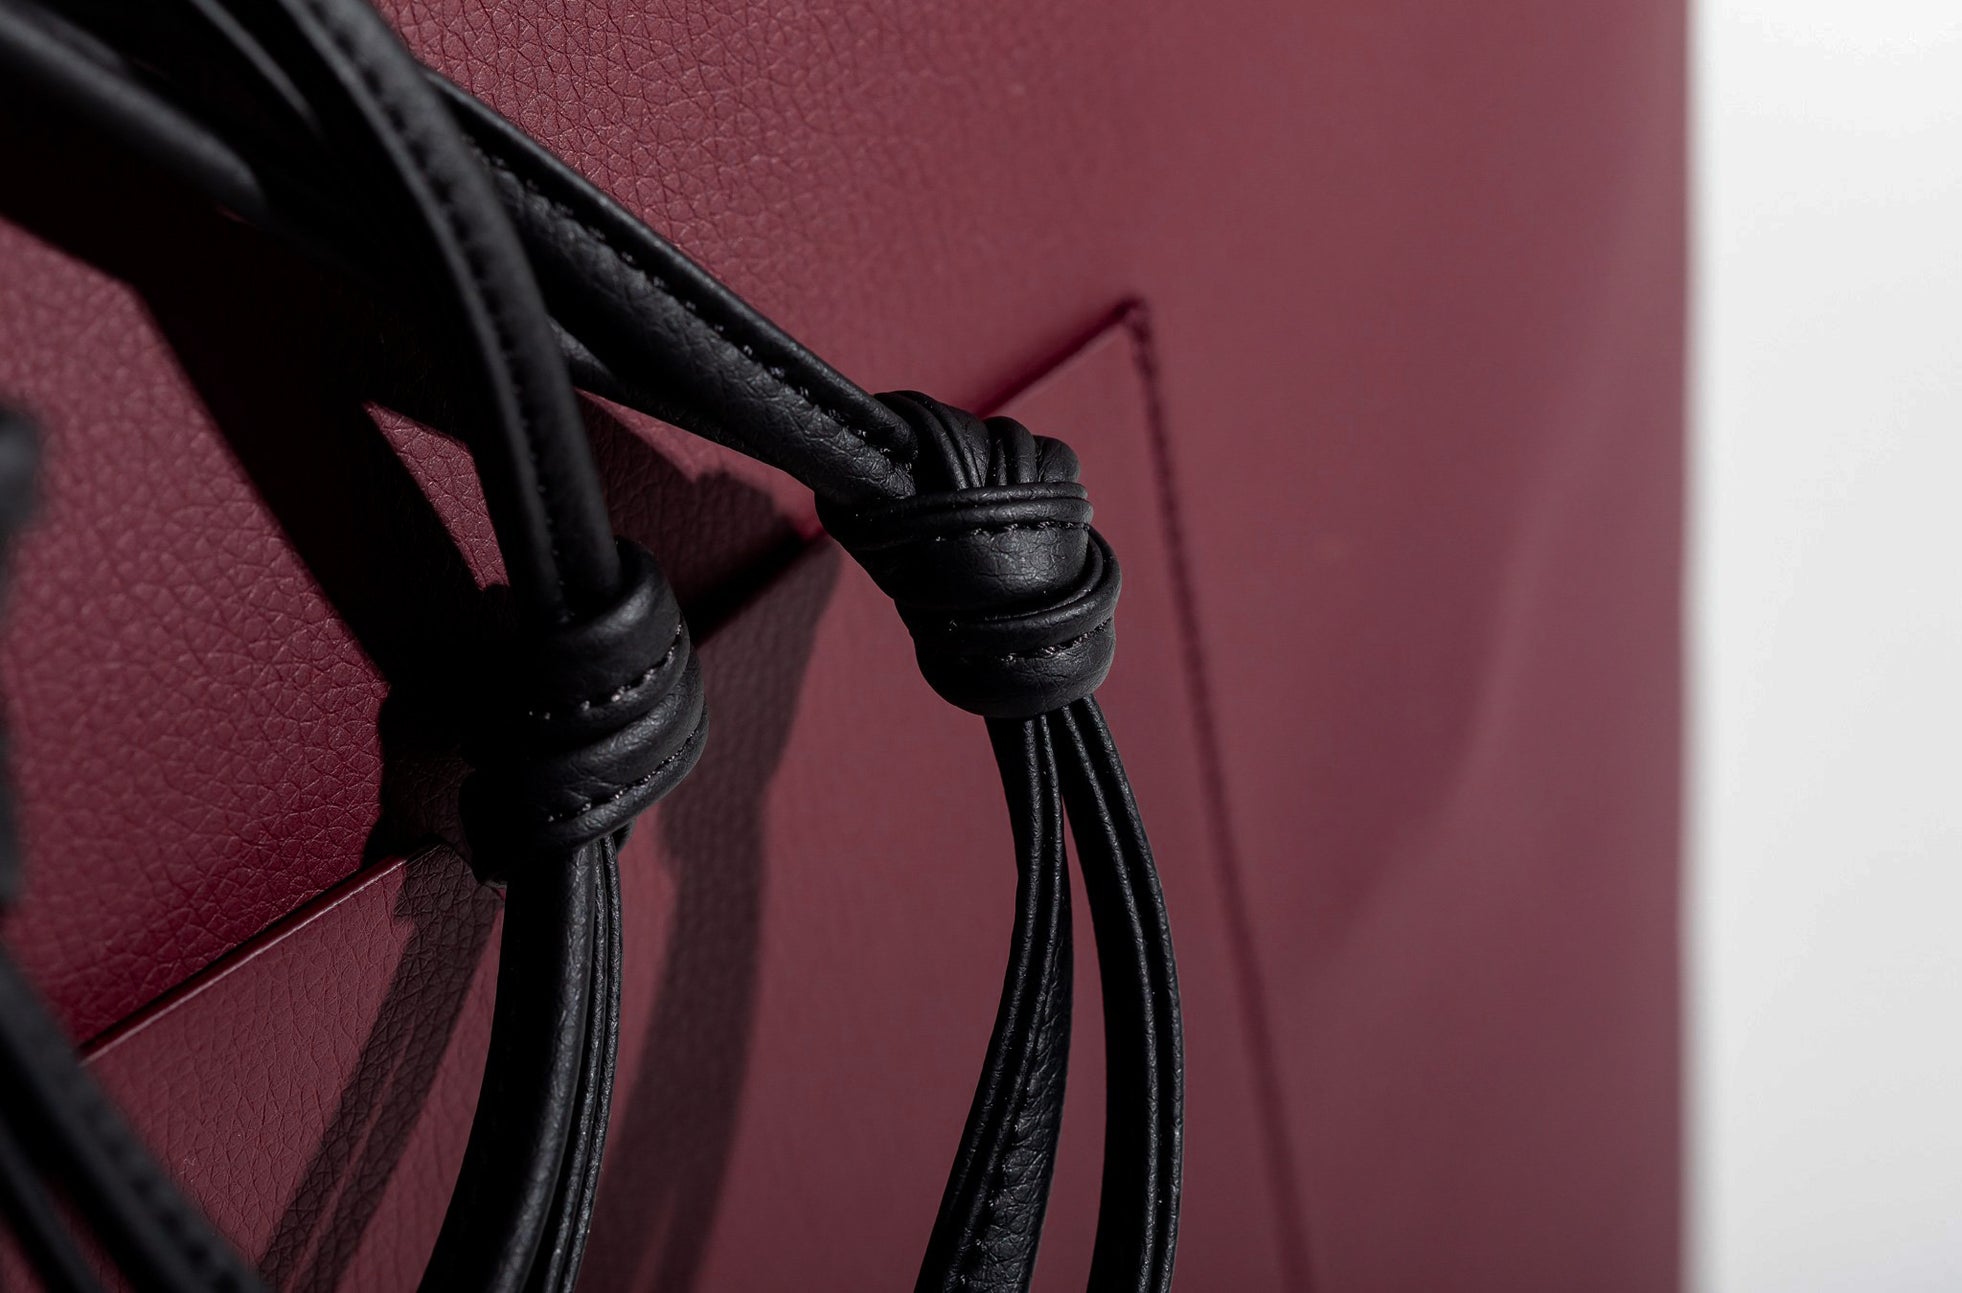 The Market Tote in Technik-Leather in Burgundy and Black image 5